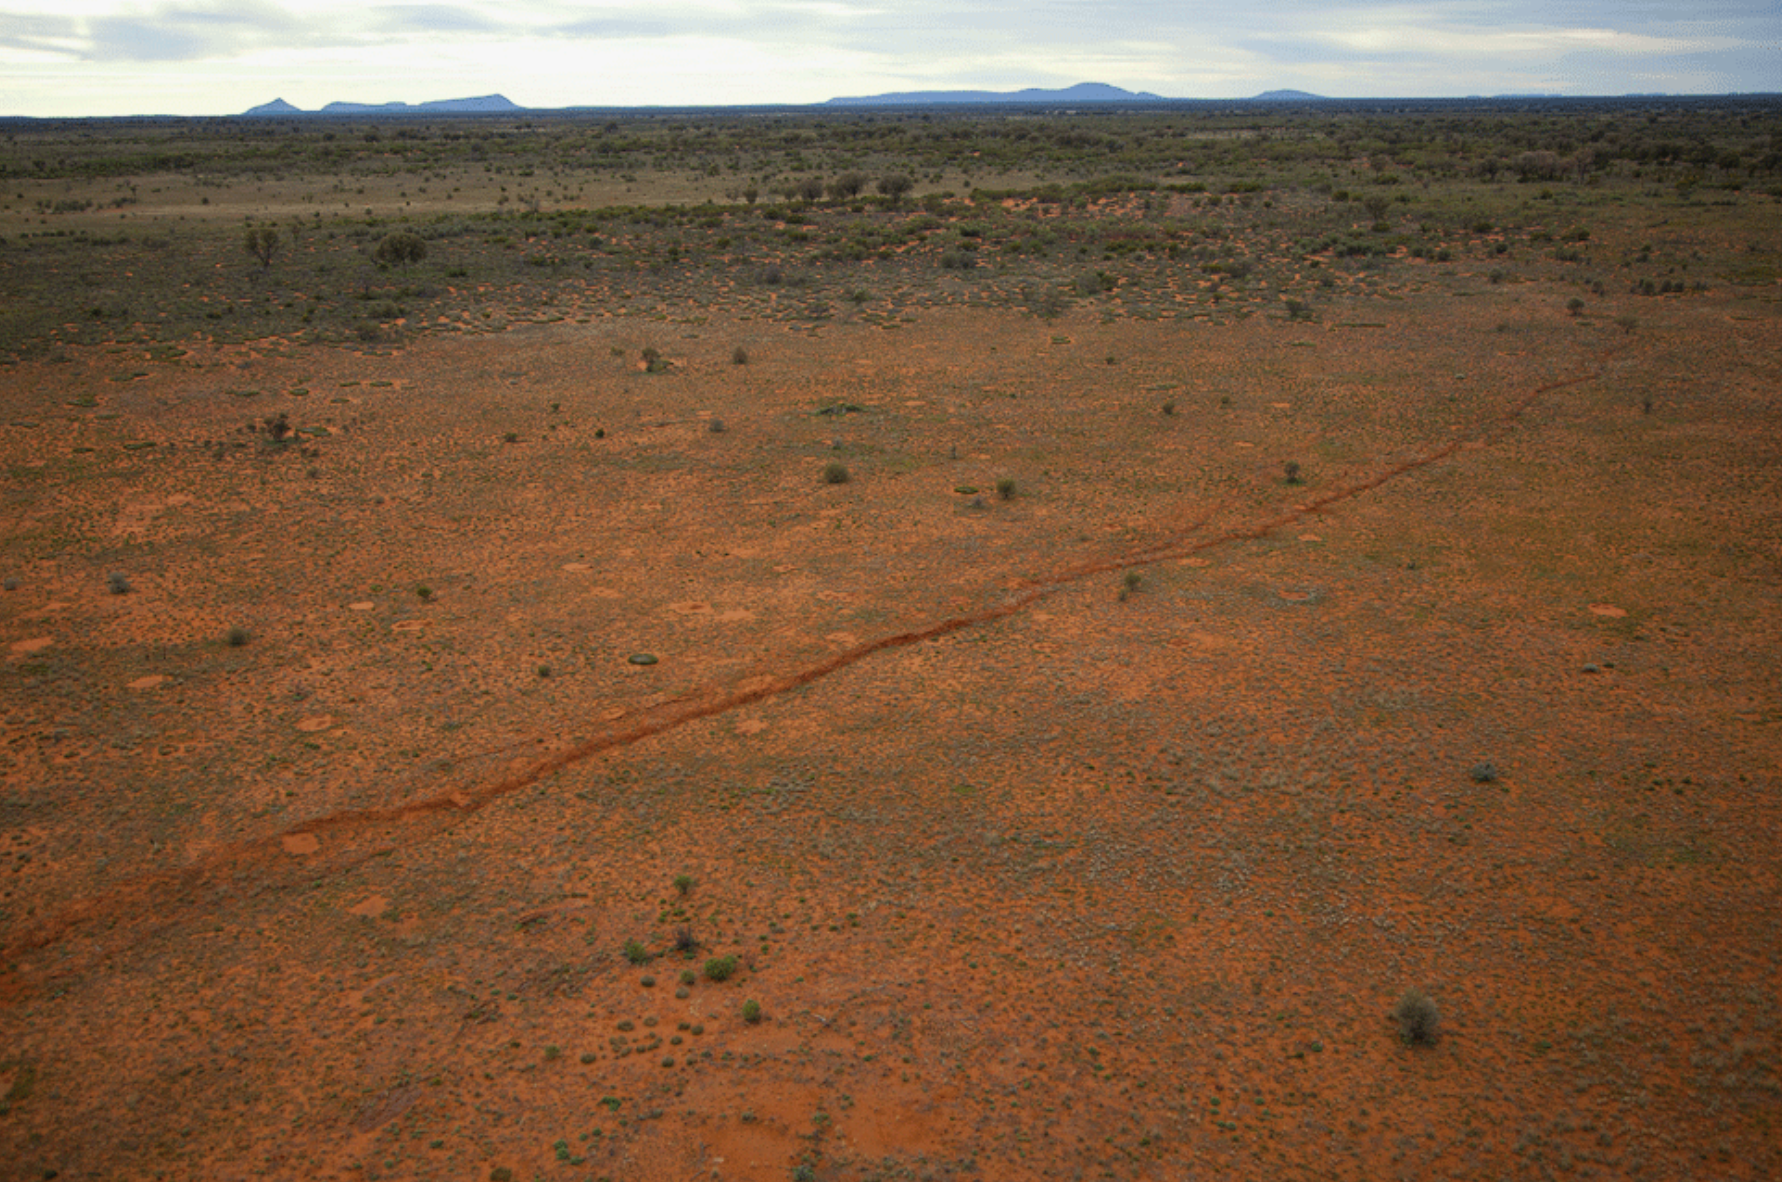 A 20 km-long surface rupture also formed in the Petermann Ranges.